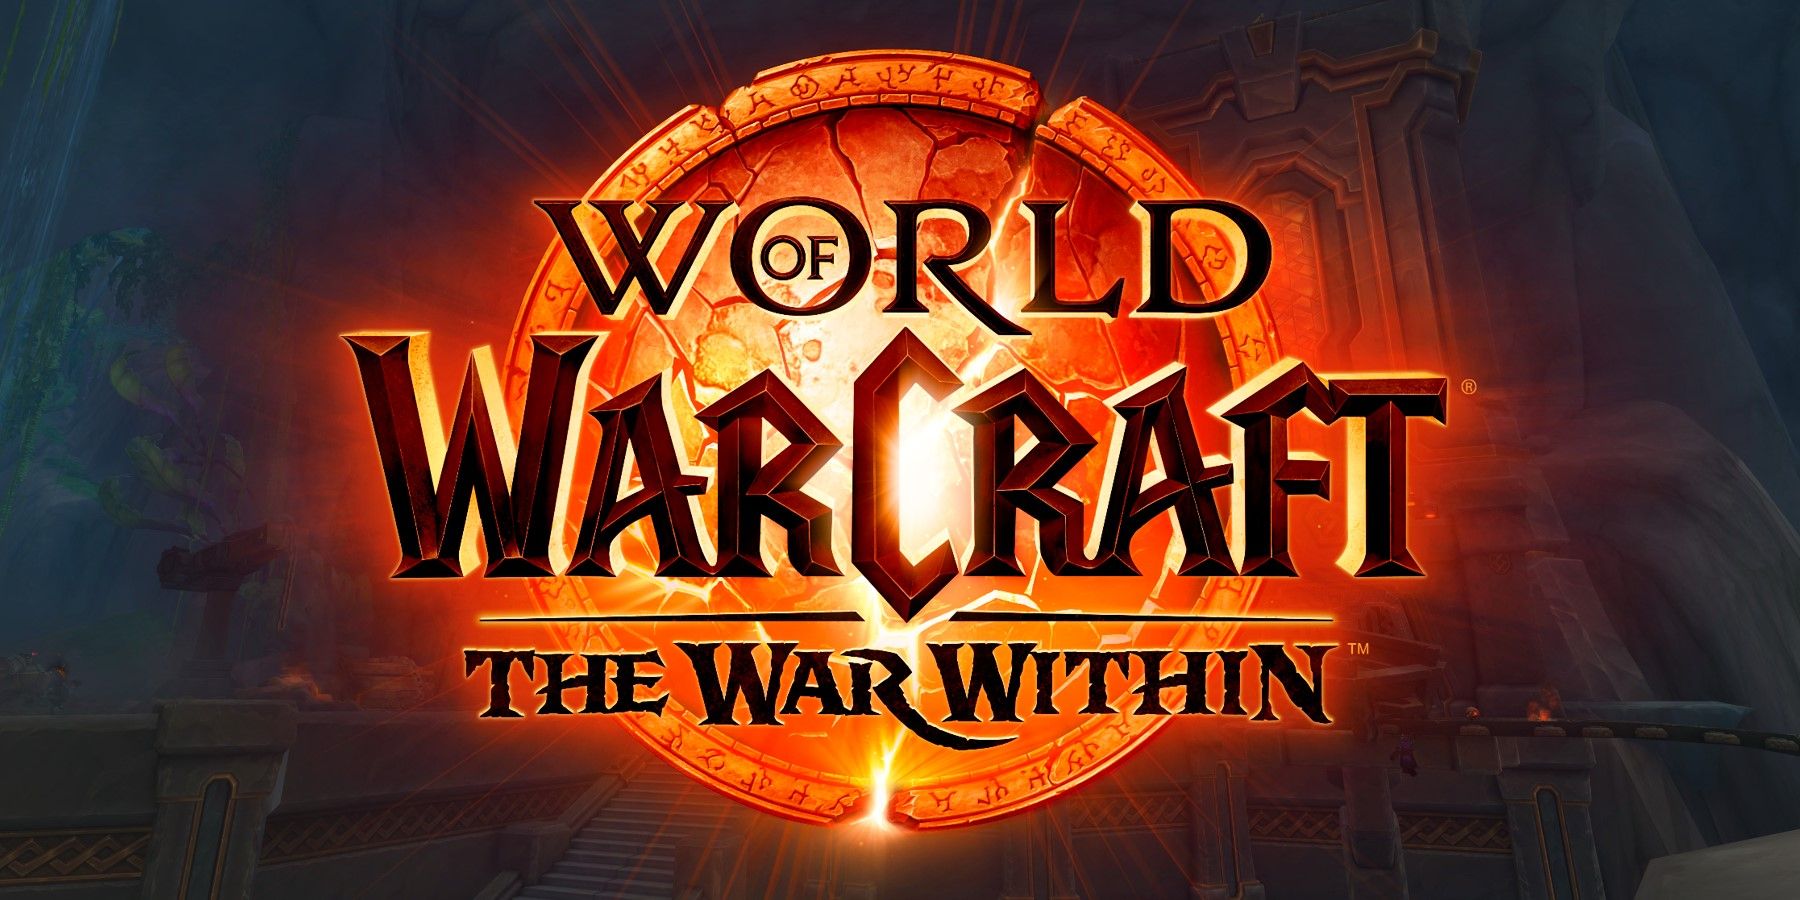 the ringing deeps from wow tww with the logo in front of it